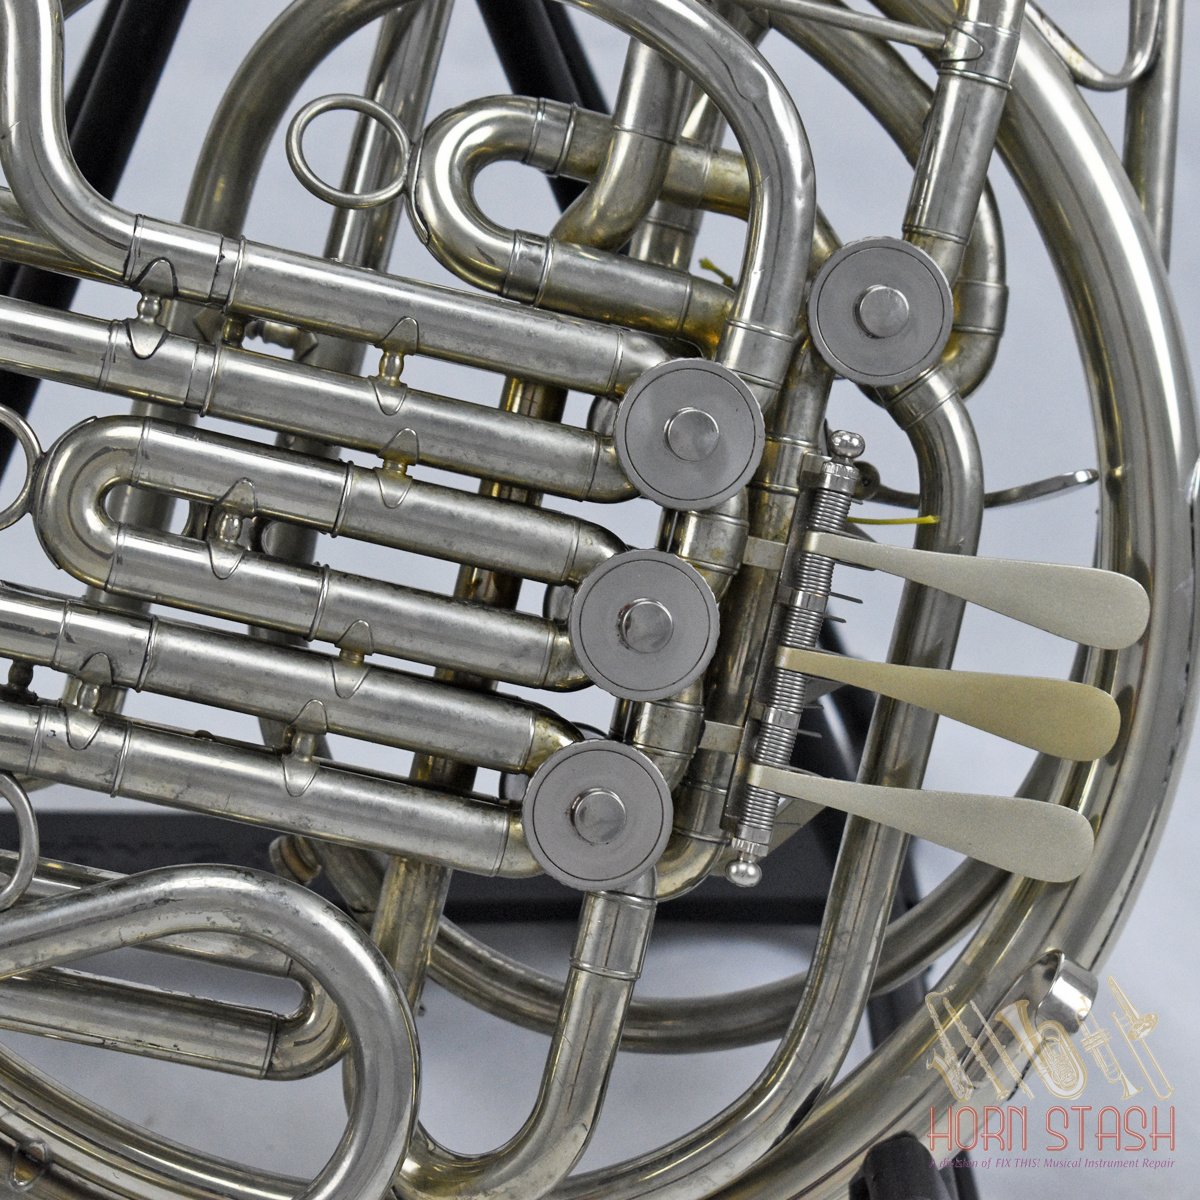 Holton Used Holton H177 Double French Horn - 5004XX